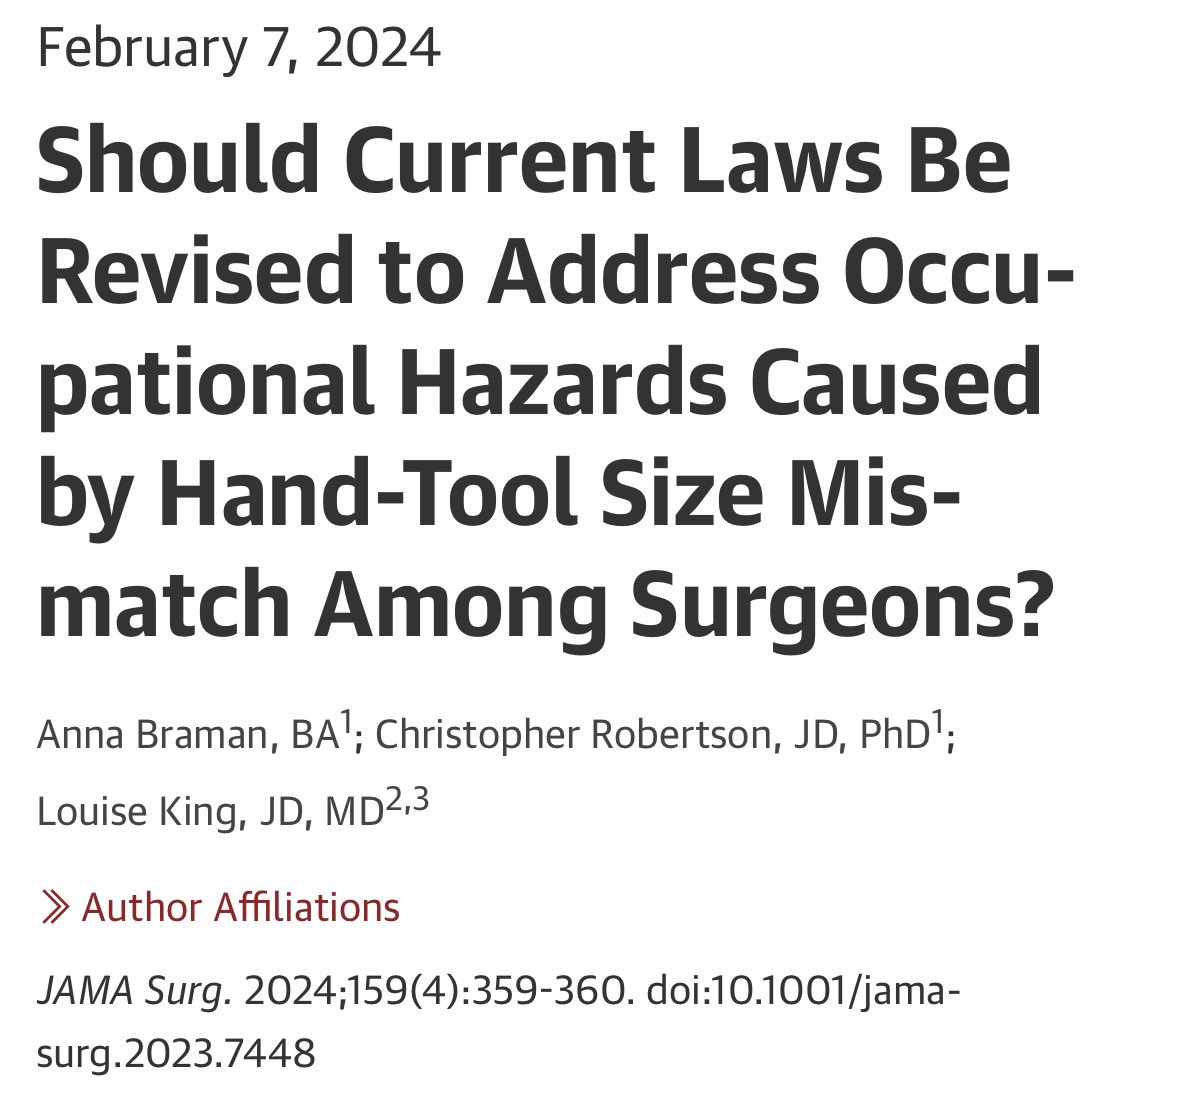 “When surgical tools are poorly fitted for the hands that use them, surgeons experience pain, injuries, and disabilities…this is a form of structural discrimination.”